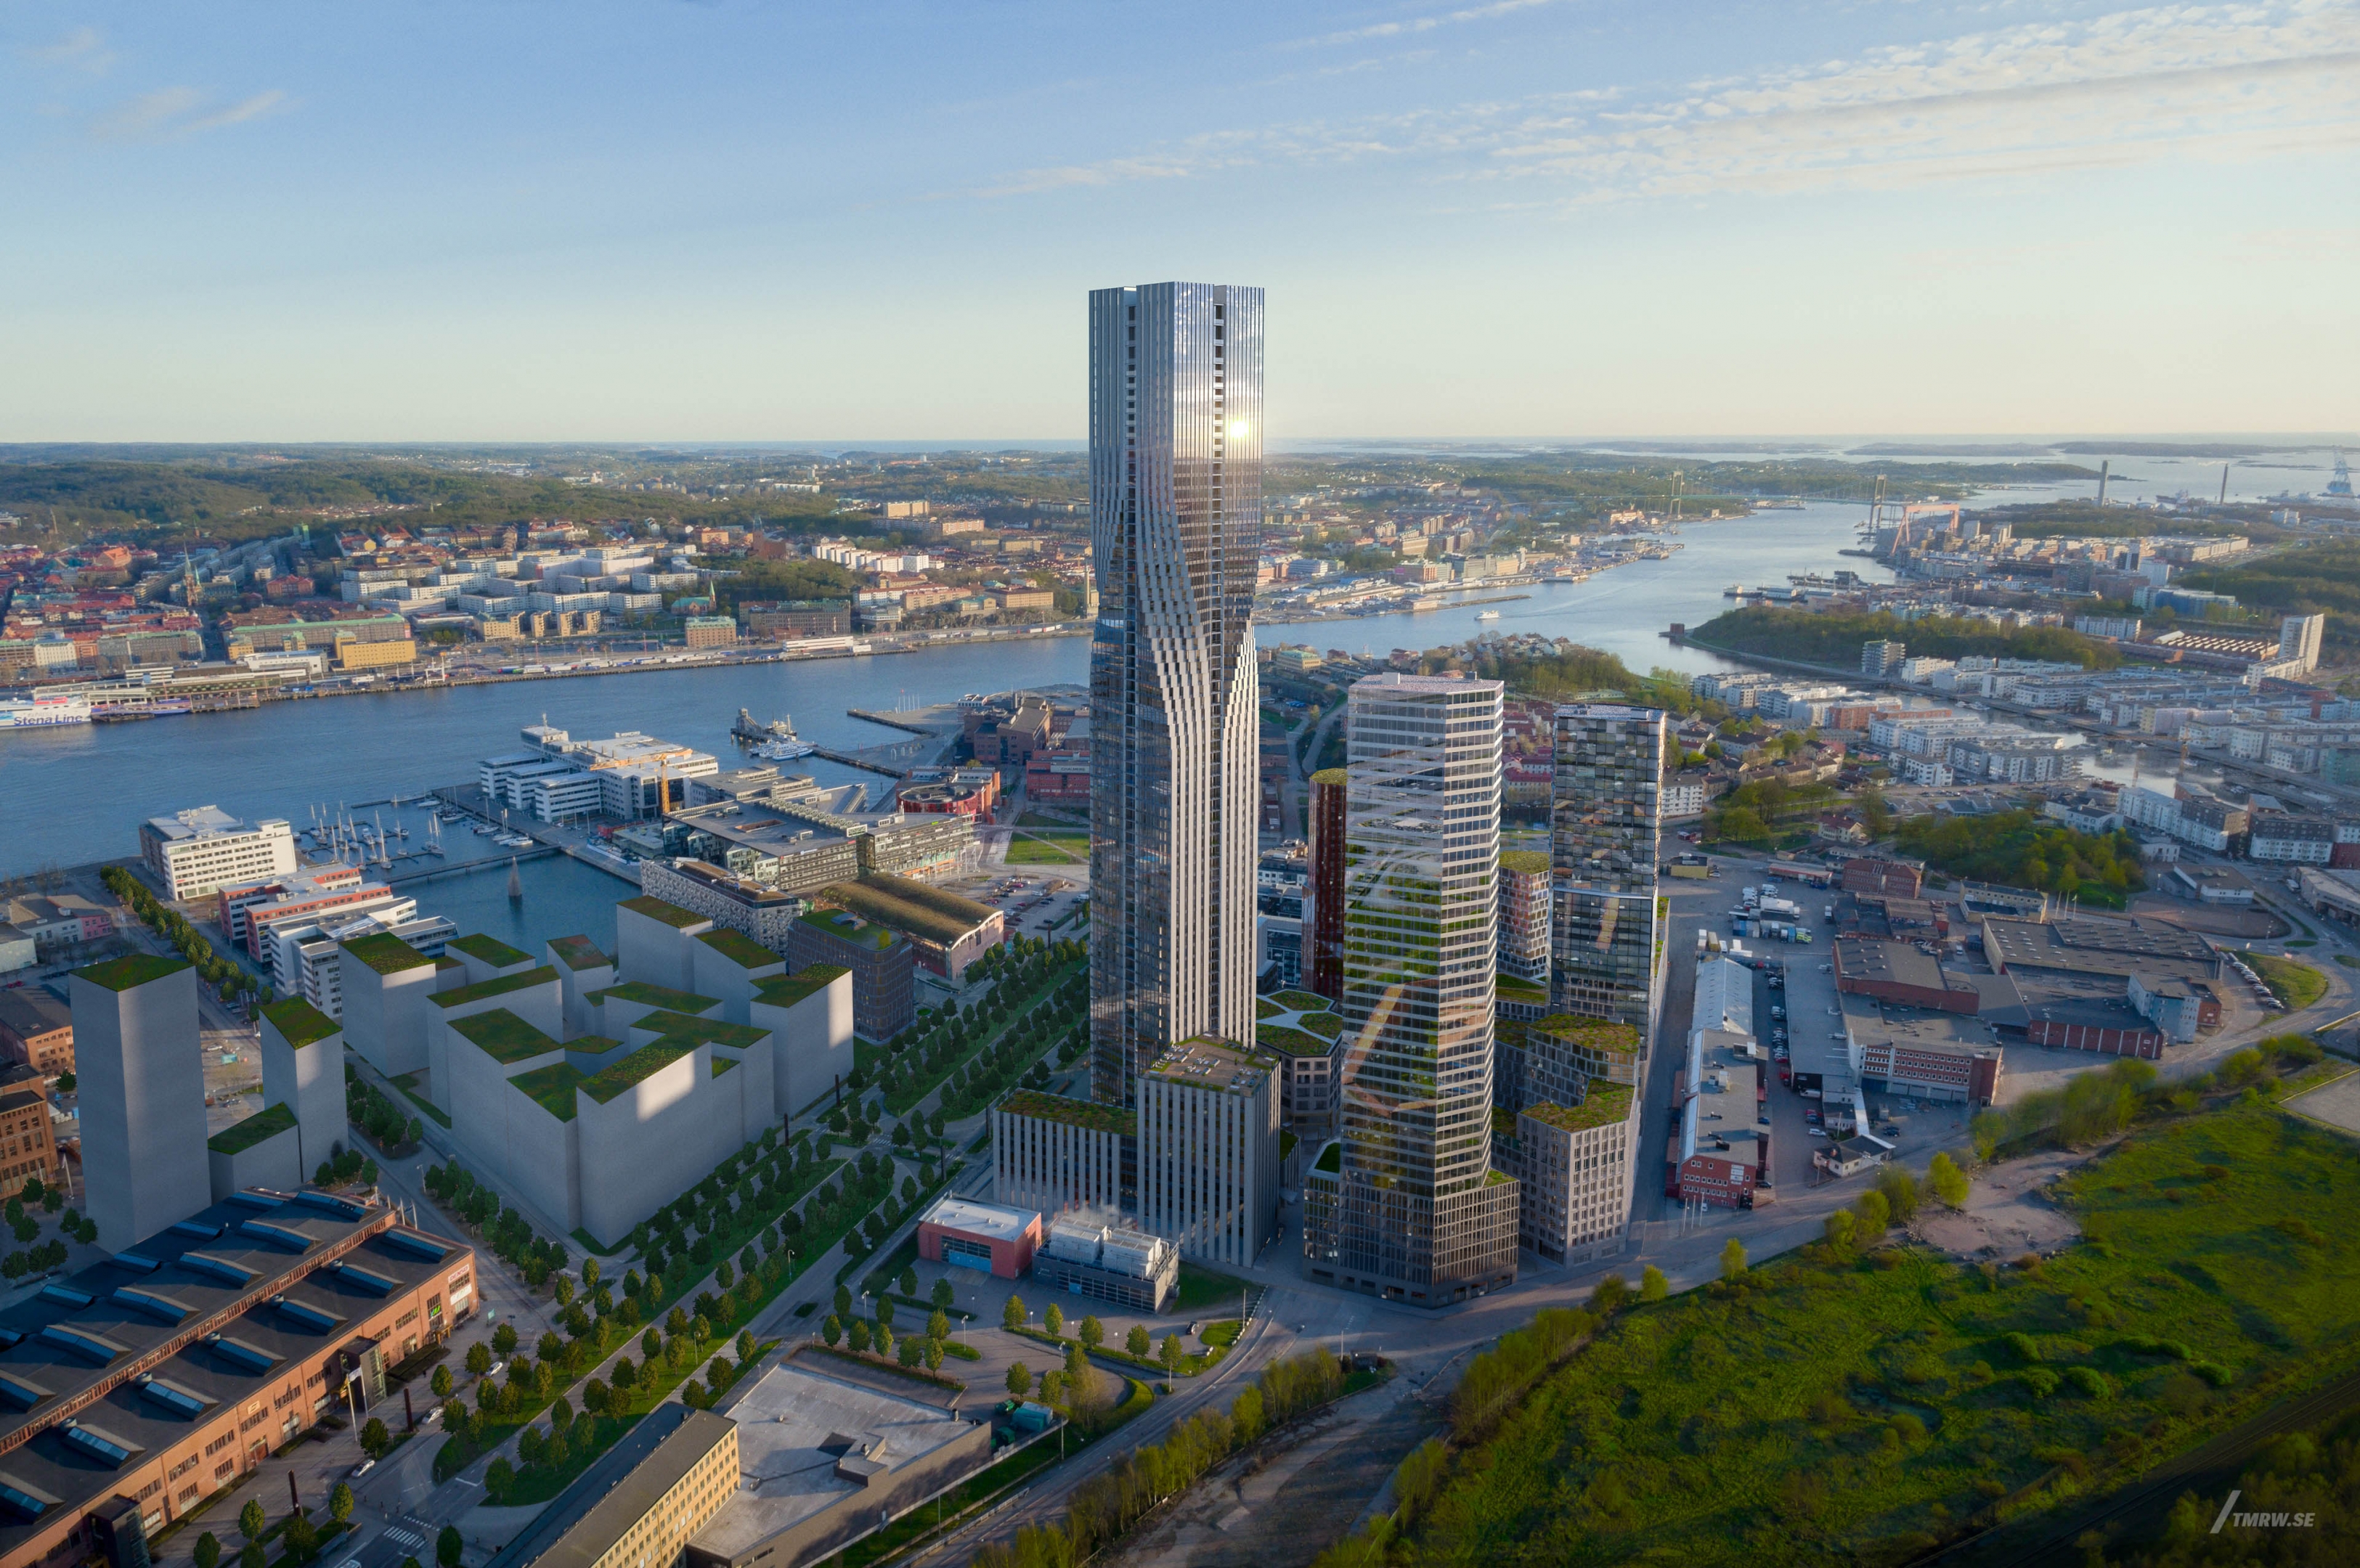 Architectural visualization of Karlatornet for Serneke a skyscraper in day light from an aerial view.